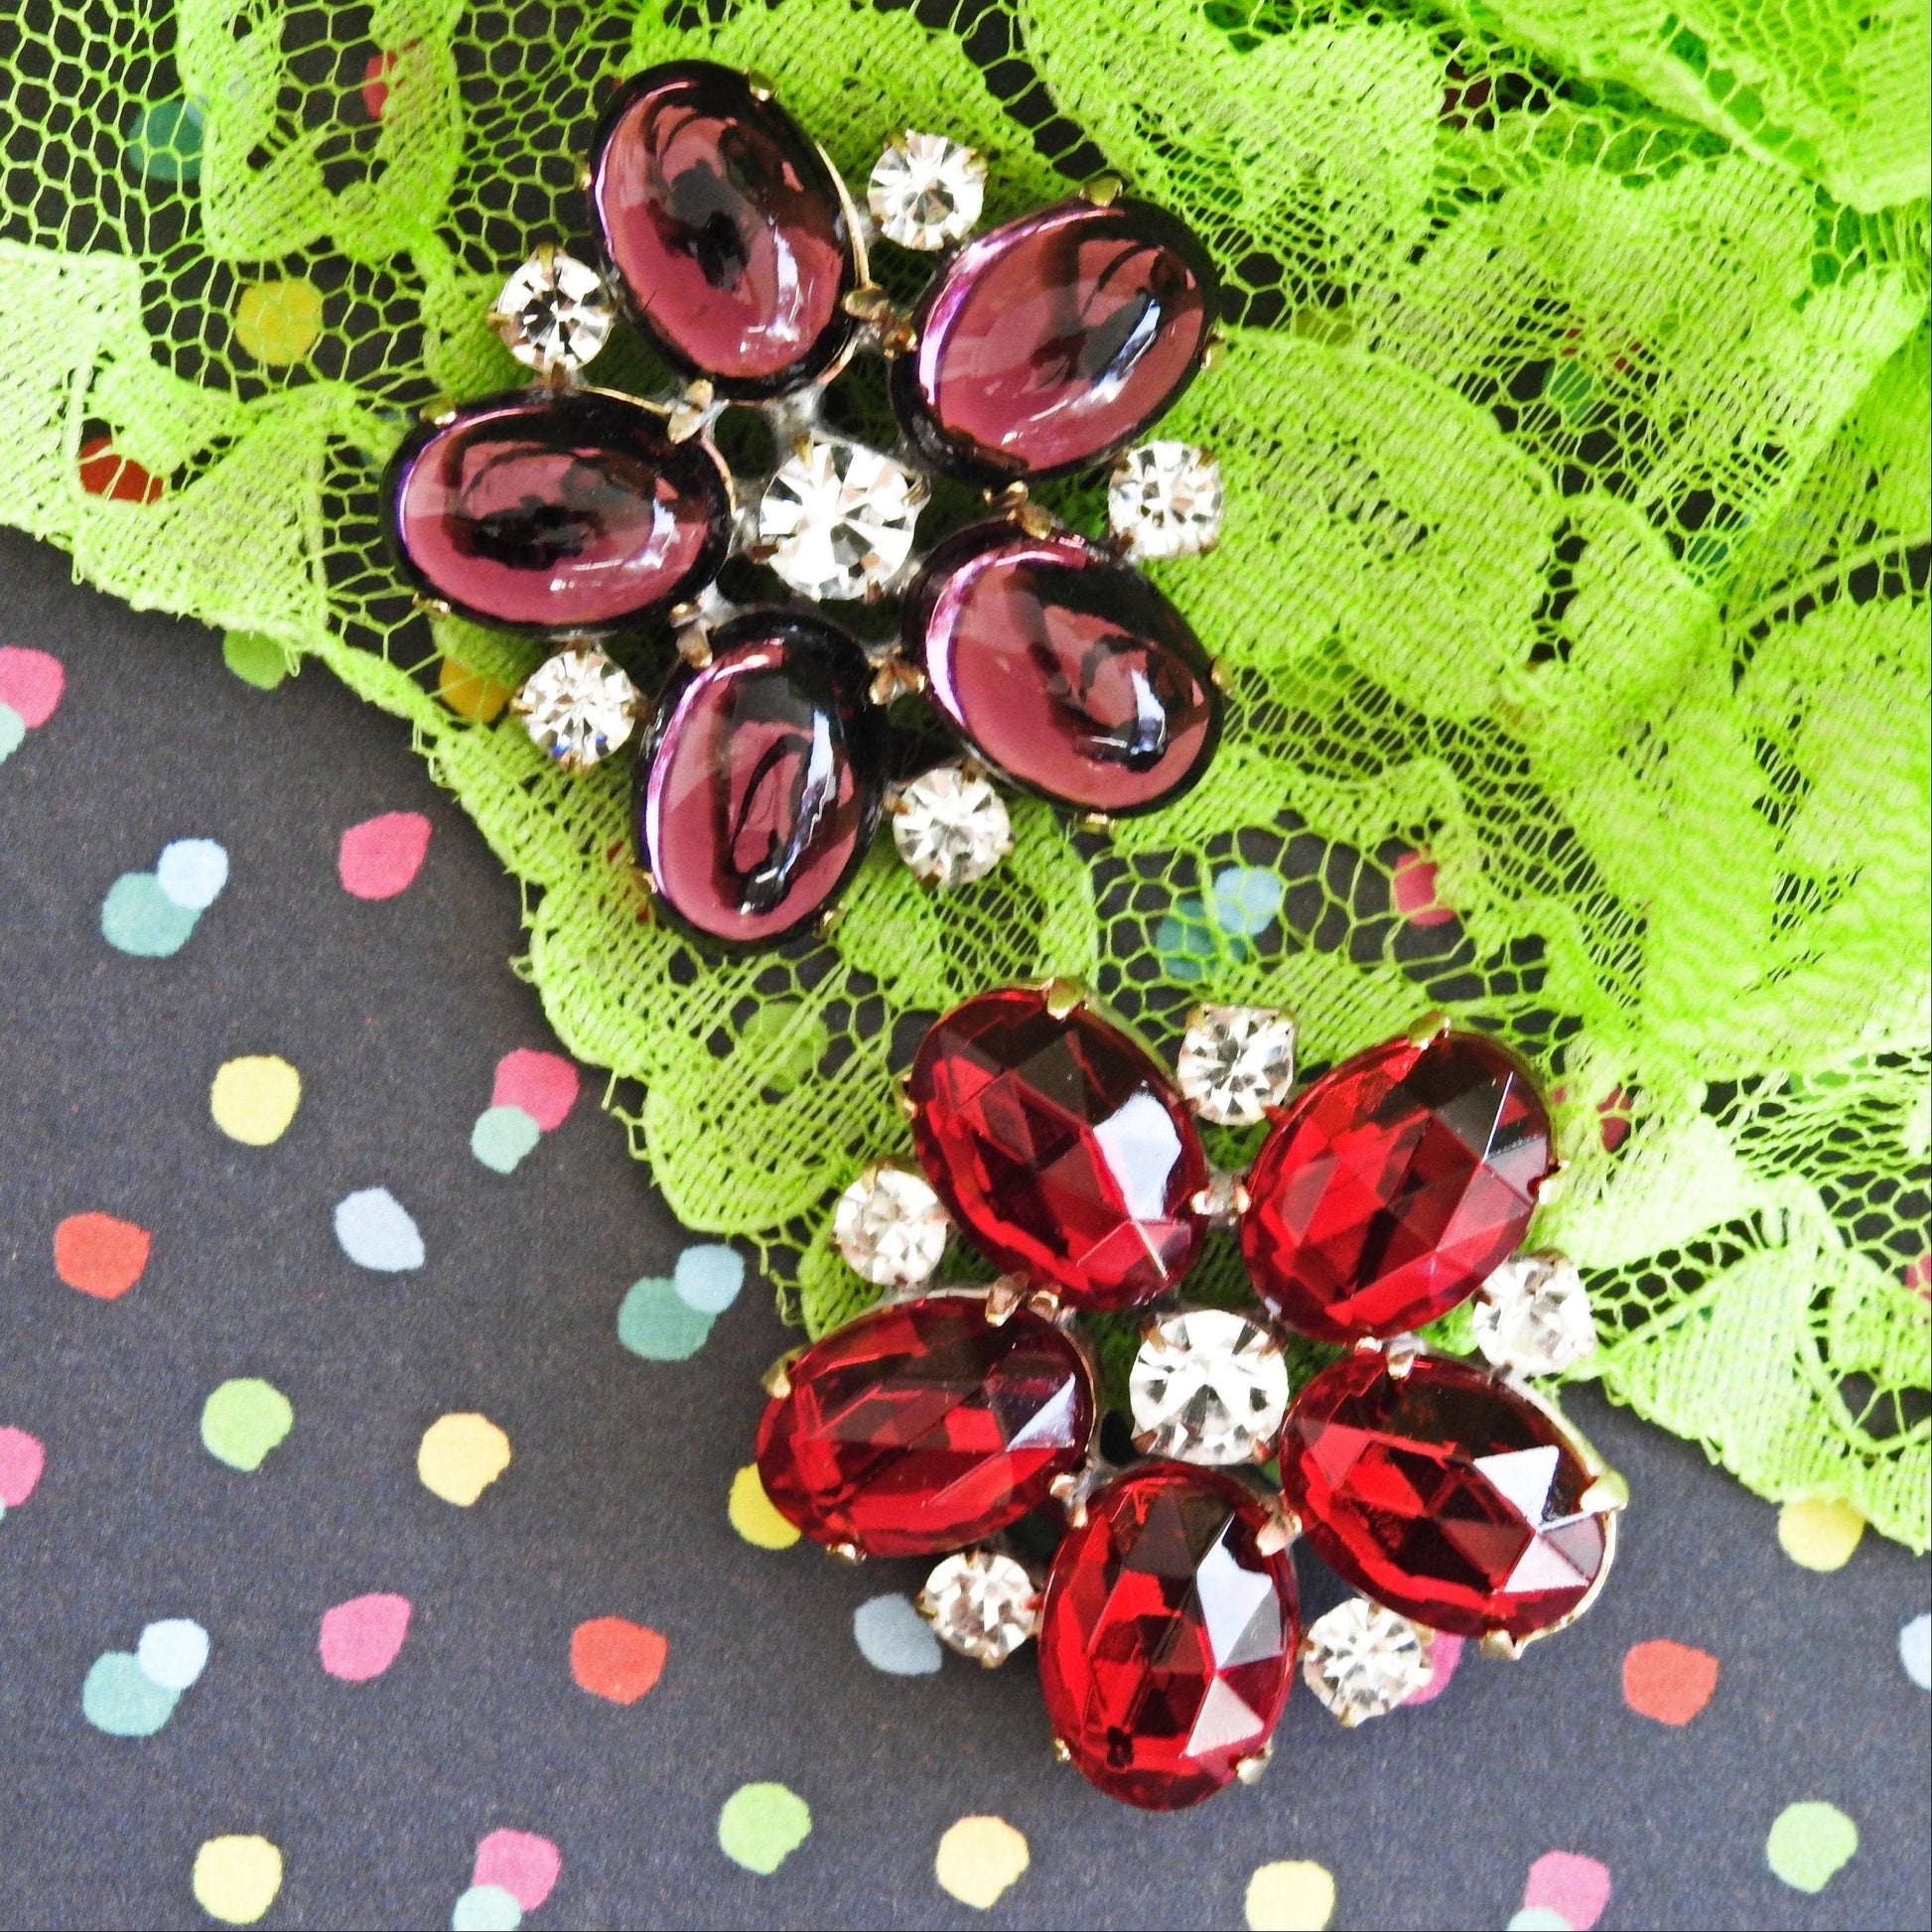 Large glass buttons for floral embellishments